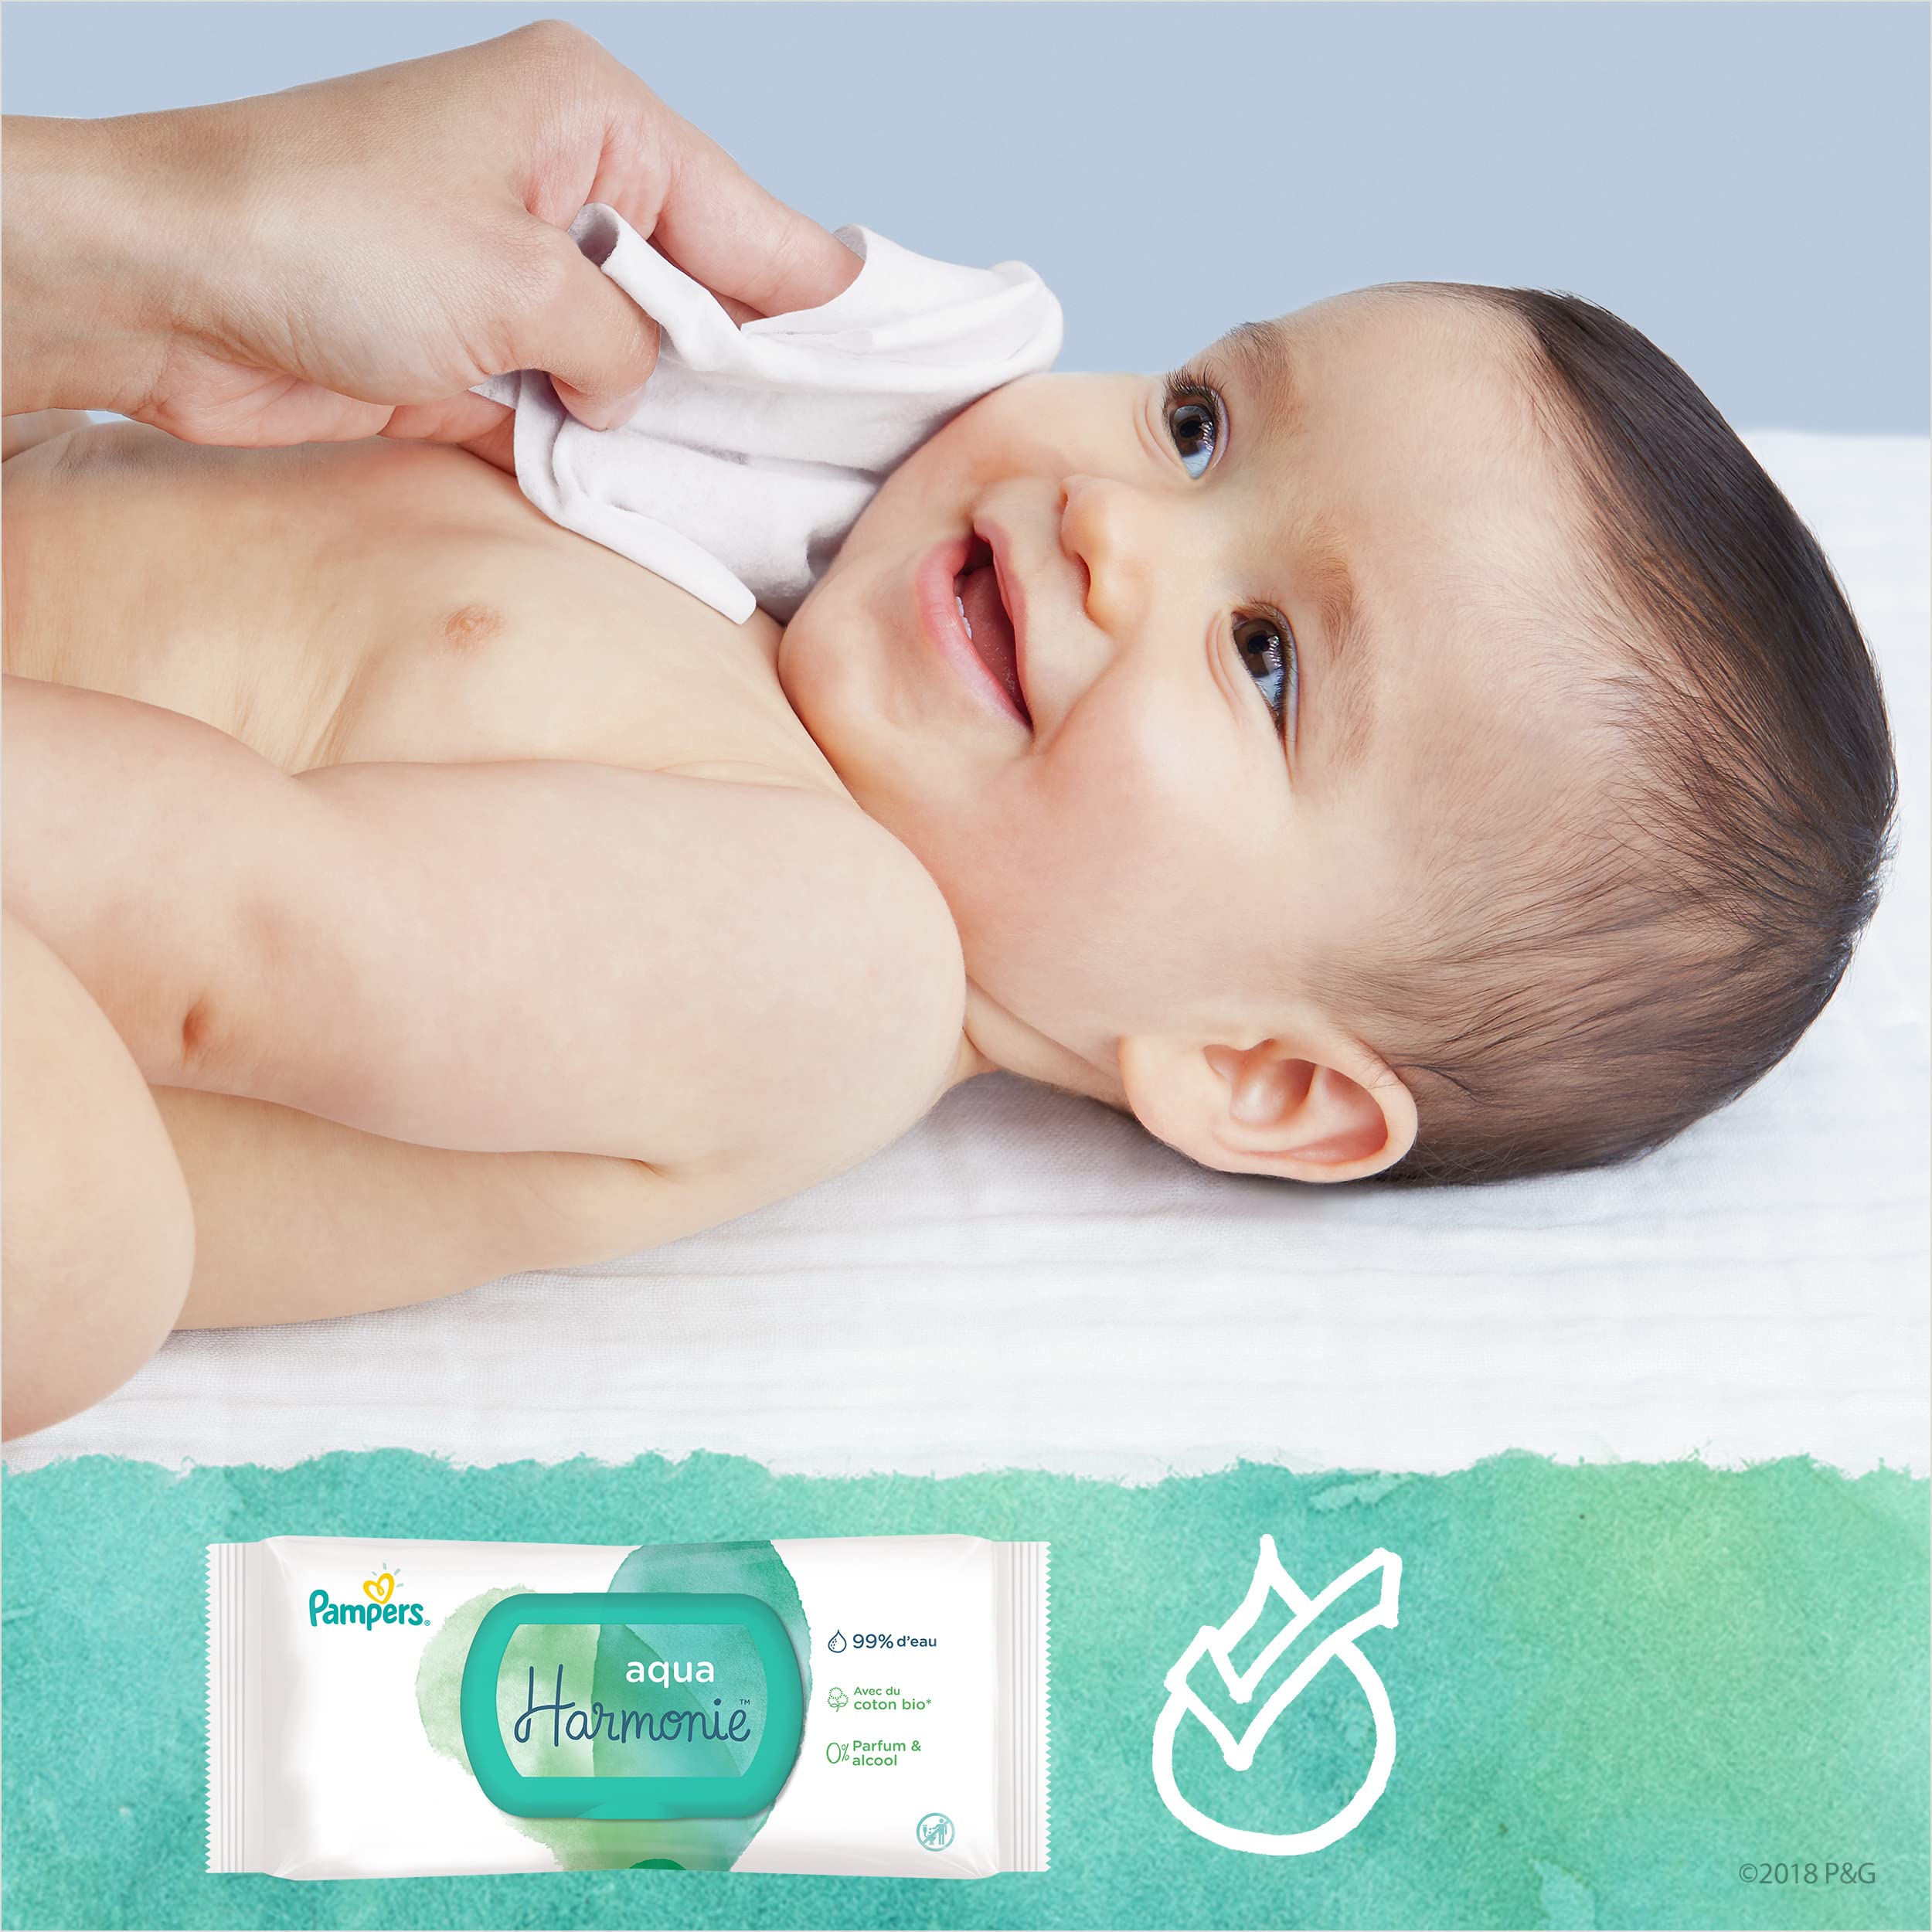 allegro pampers sesitive